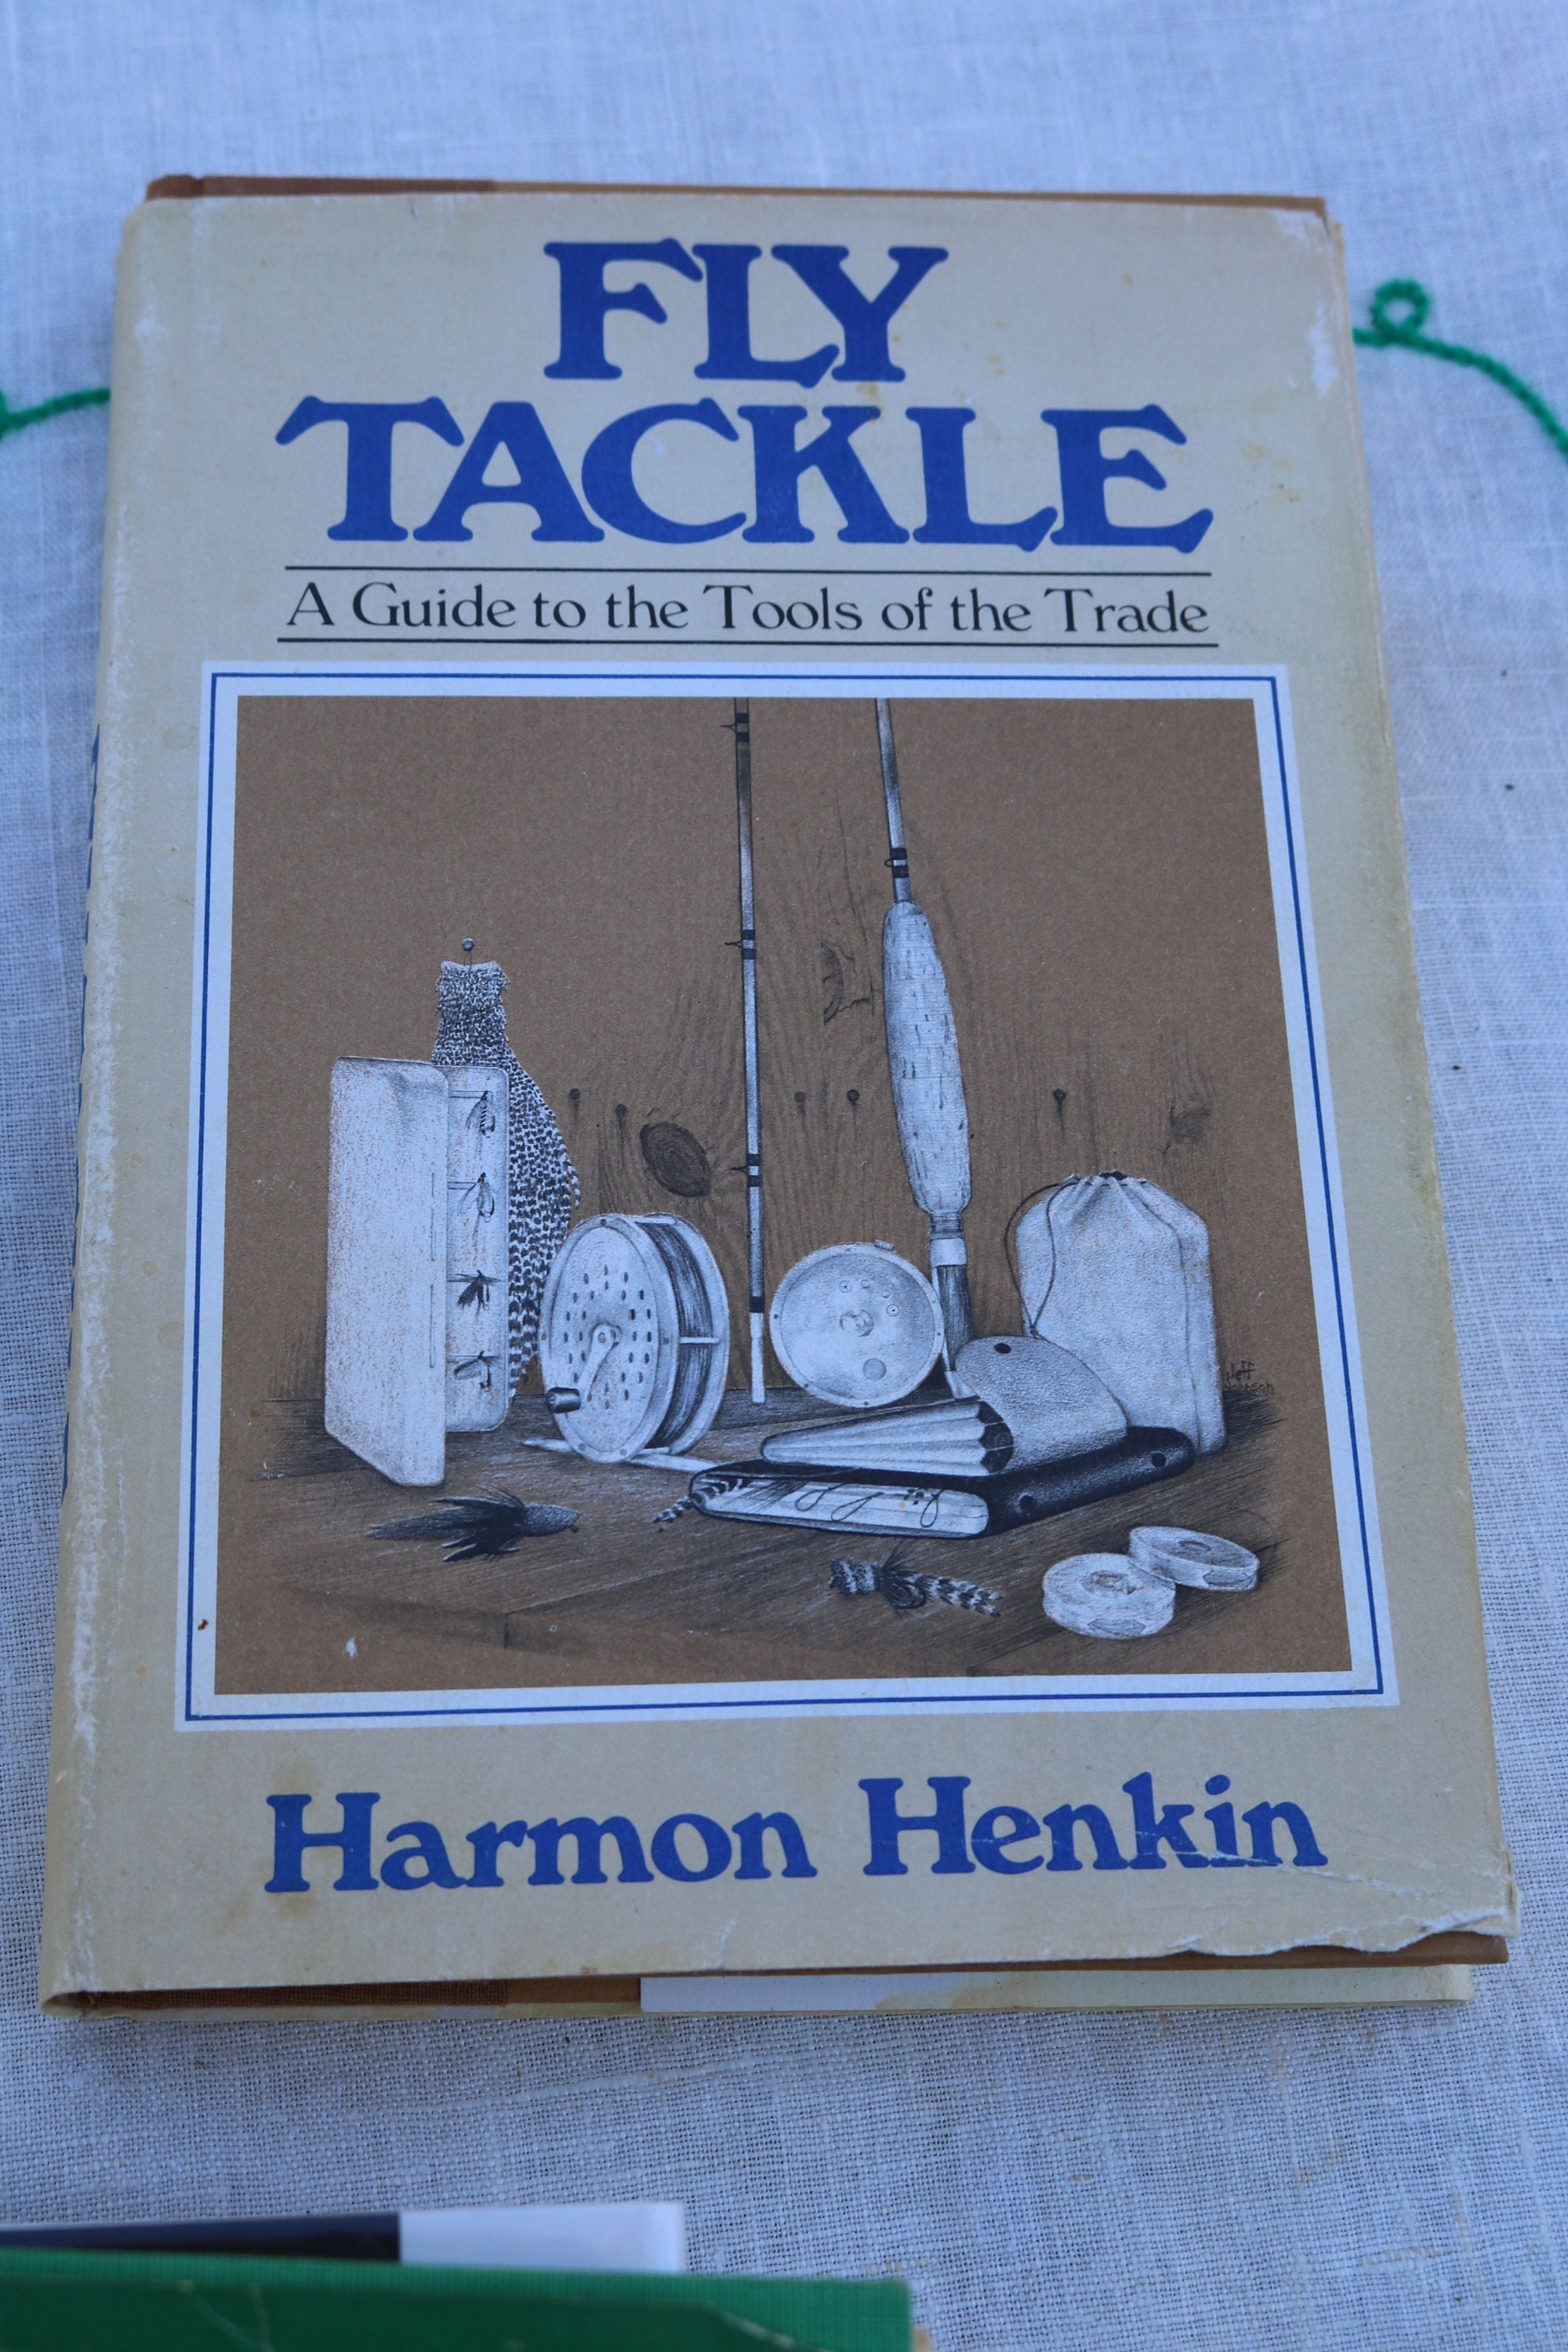 FLY TACKLE A Guide to the Tools of the Trade by Harmon Henkin